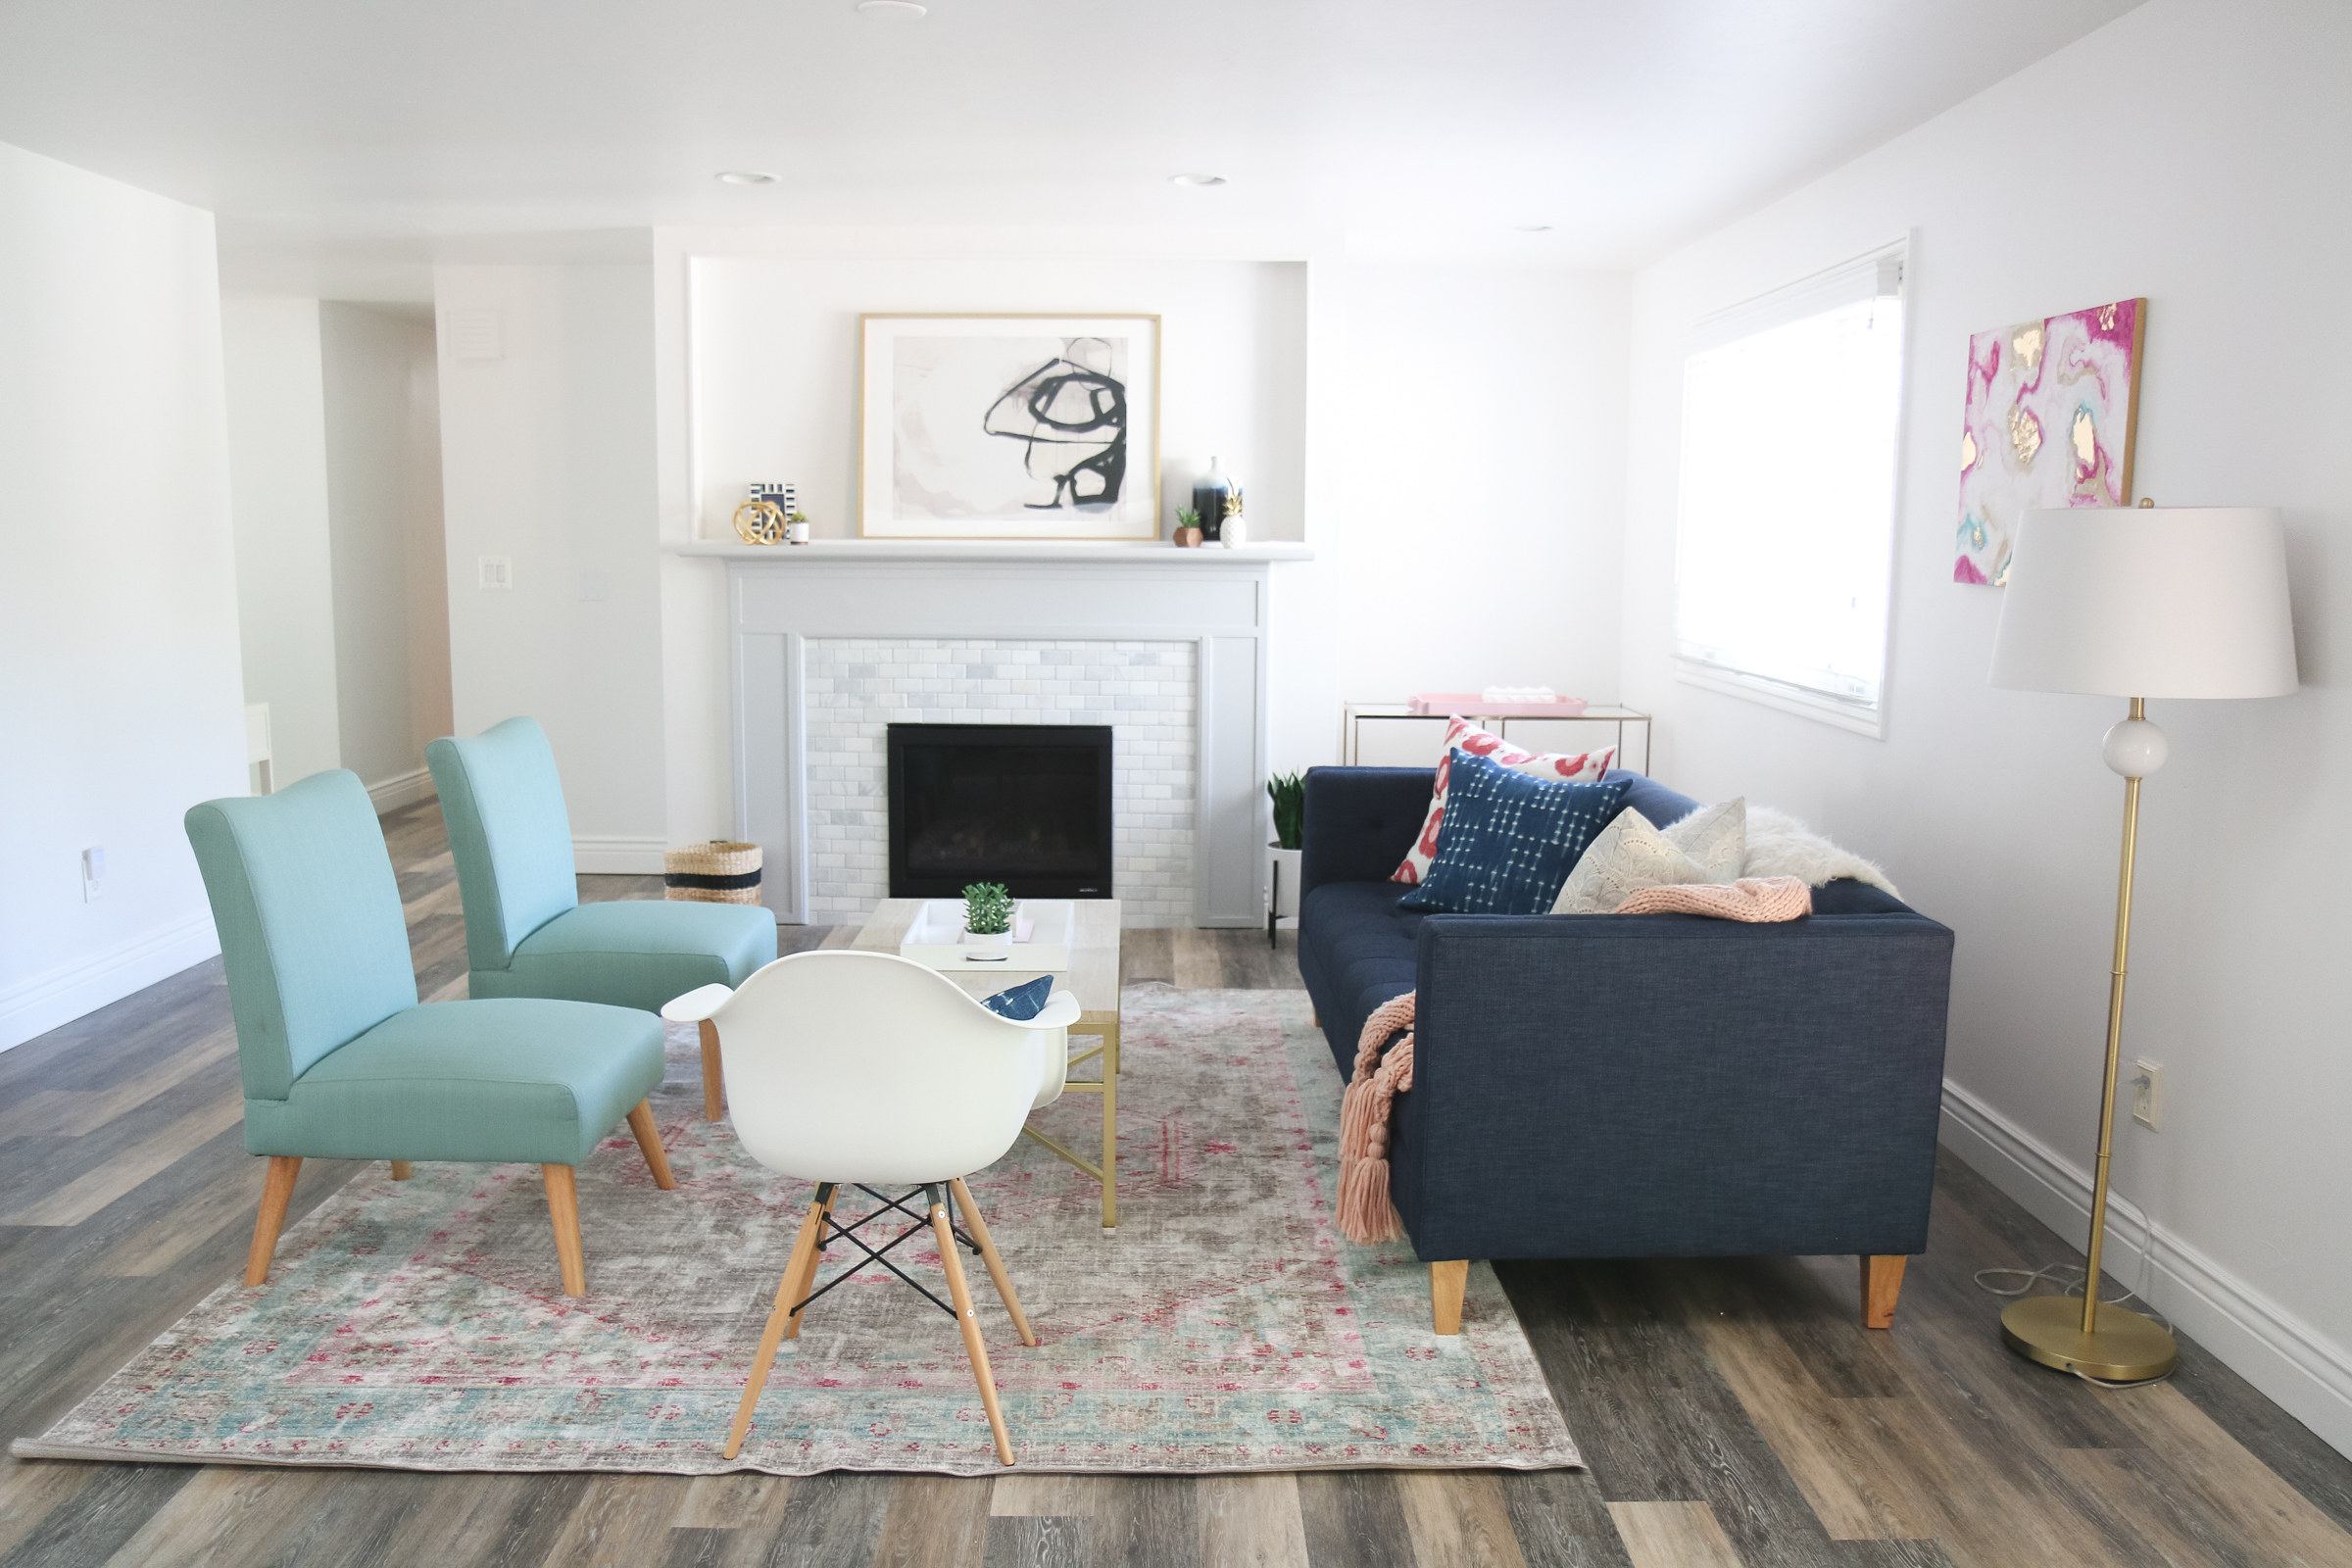 Our New Home Big Reveal: How We Styled Our Navy Couch by popular Utah blogger Sandy A La Mode